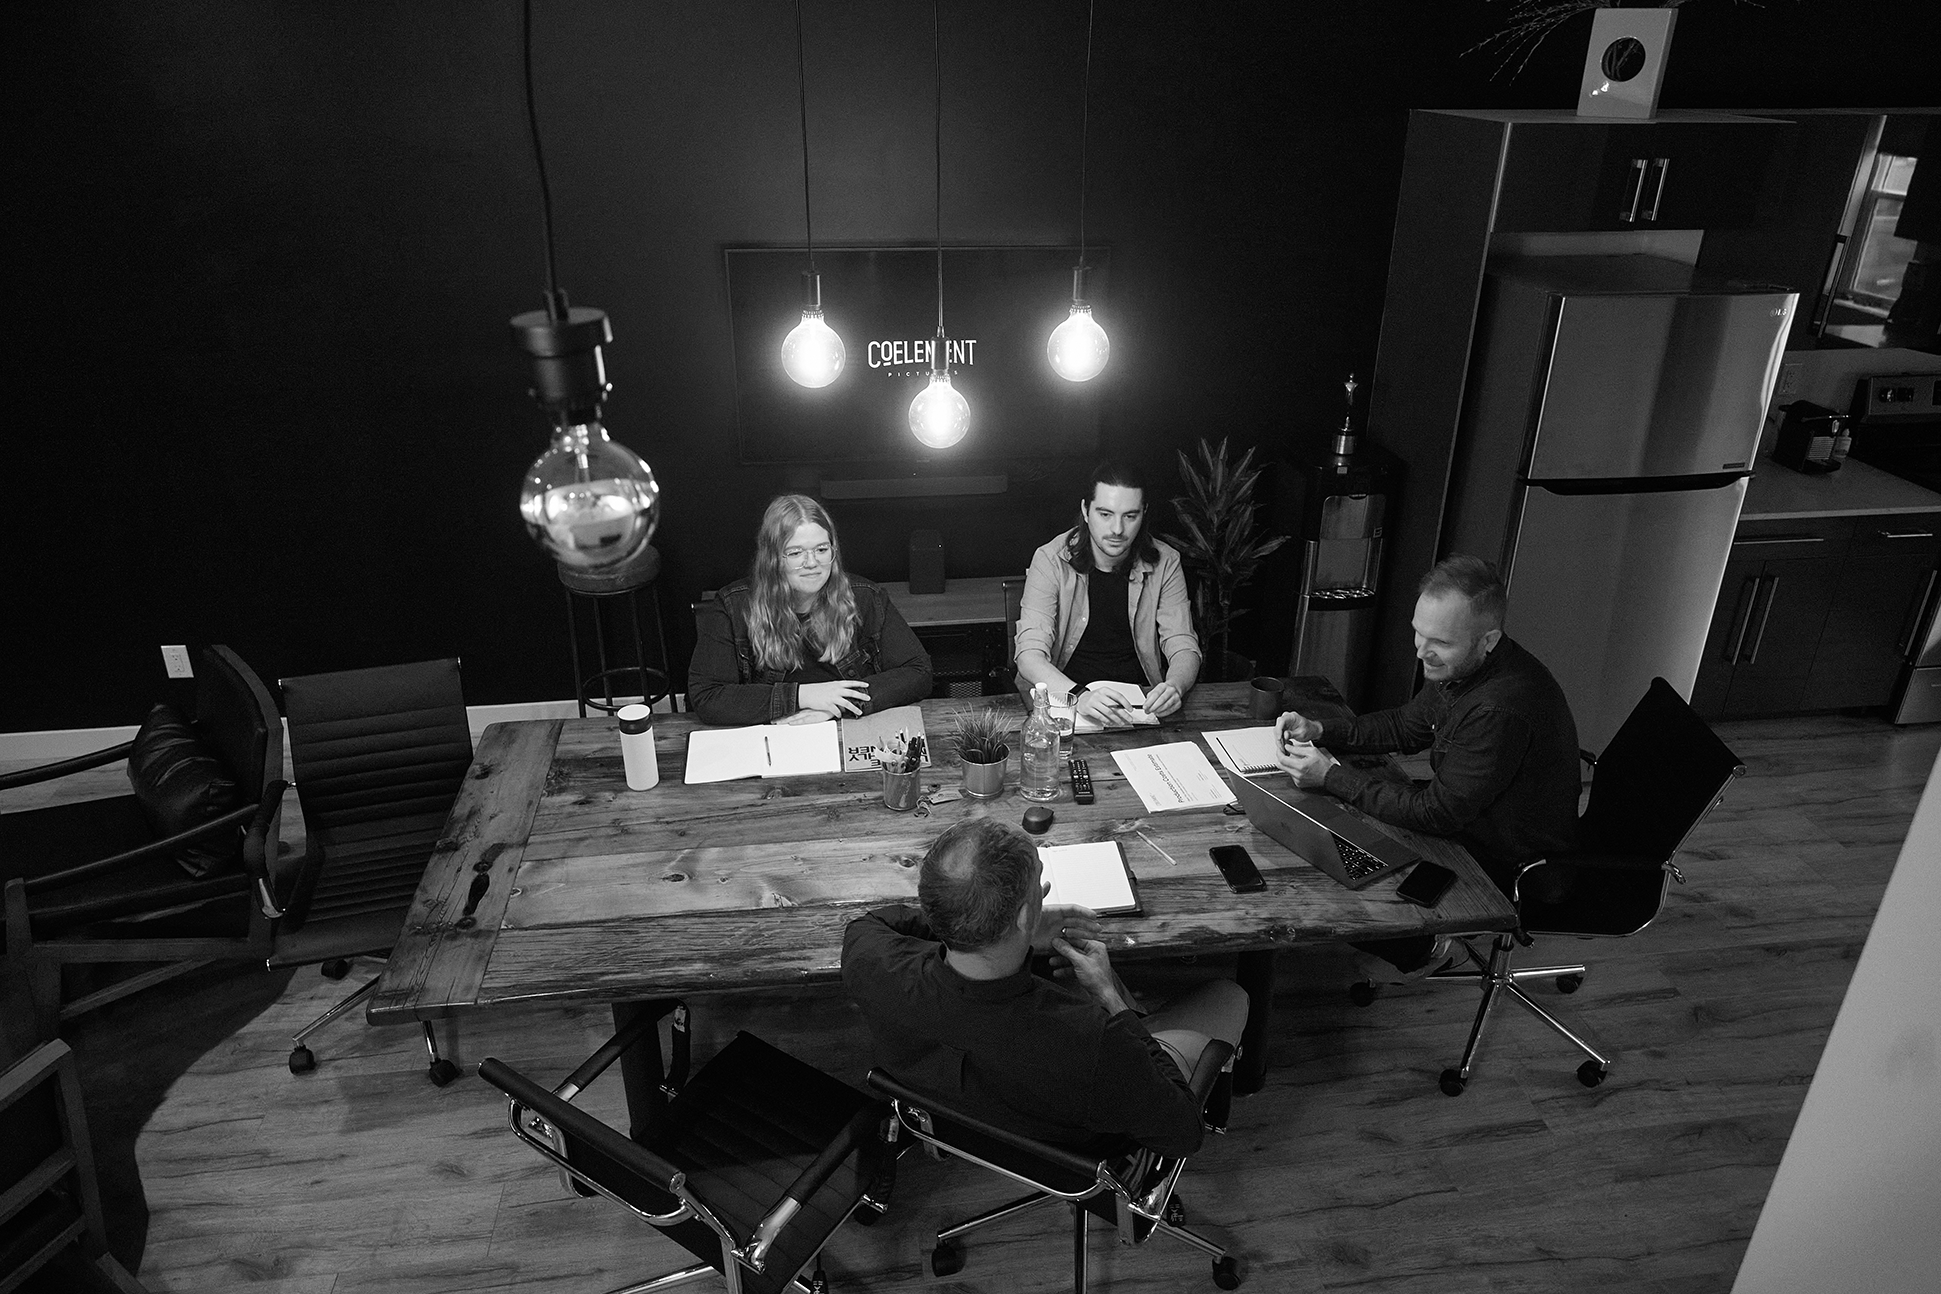 A black and white image of 5 Coelement team members working together at a wooden conference room table.